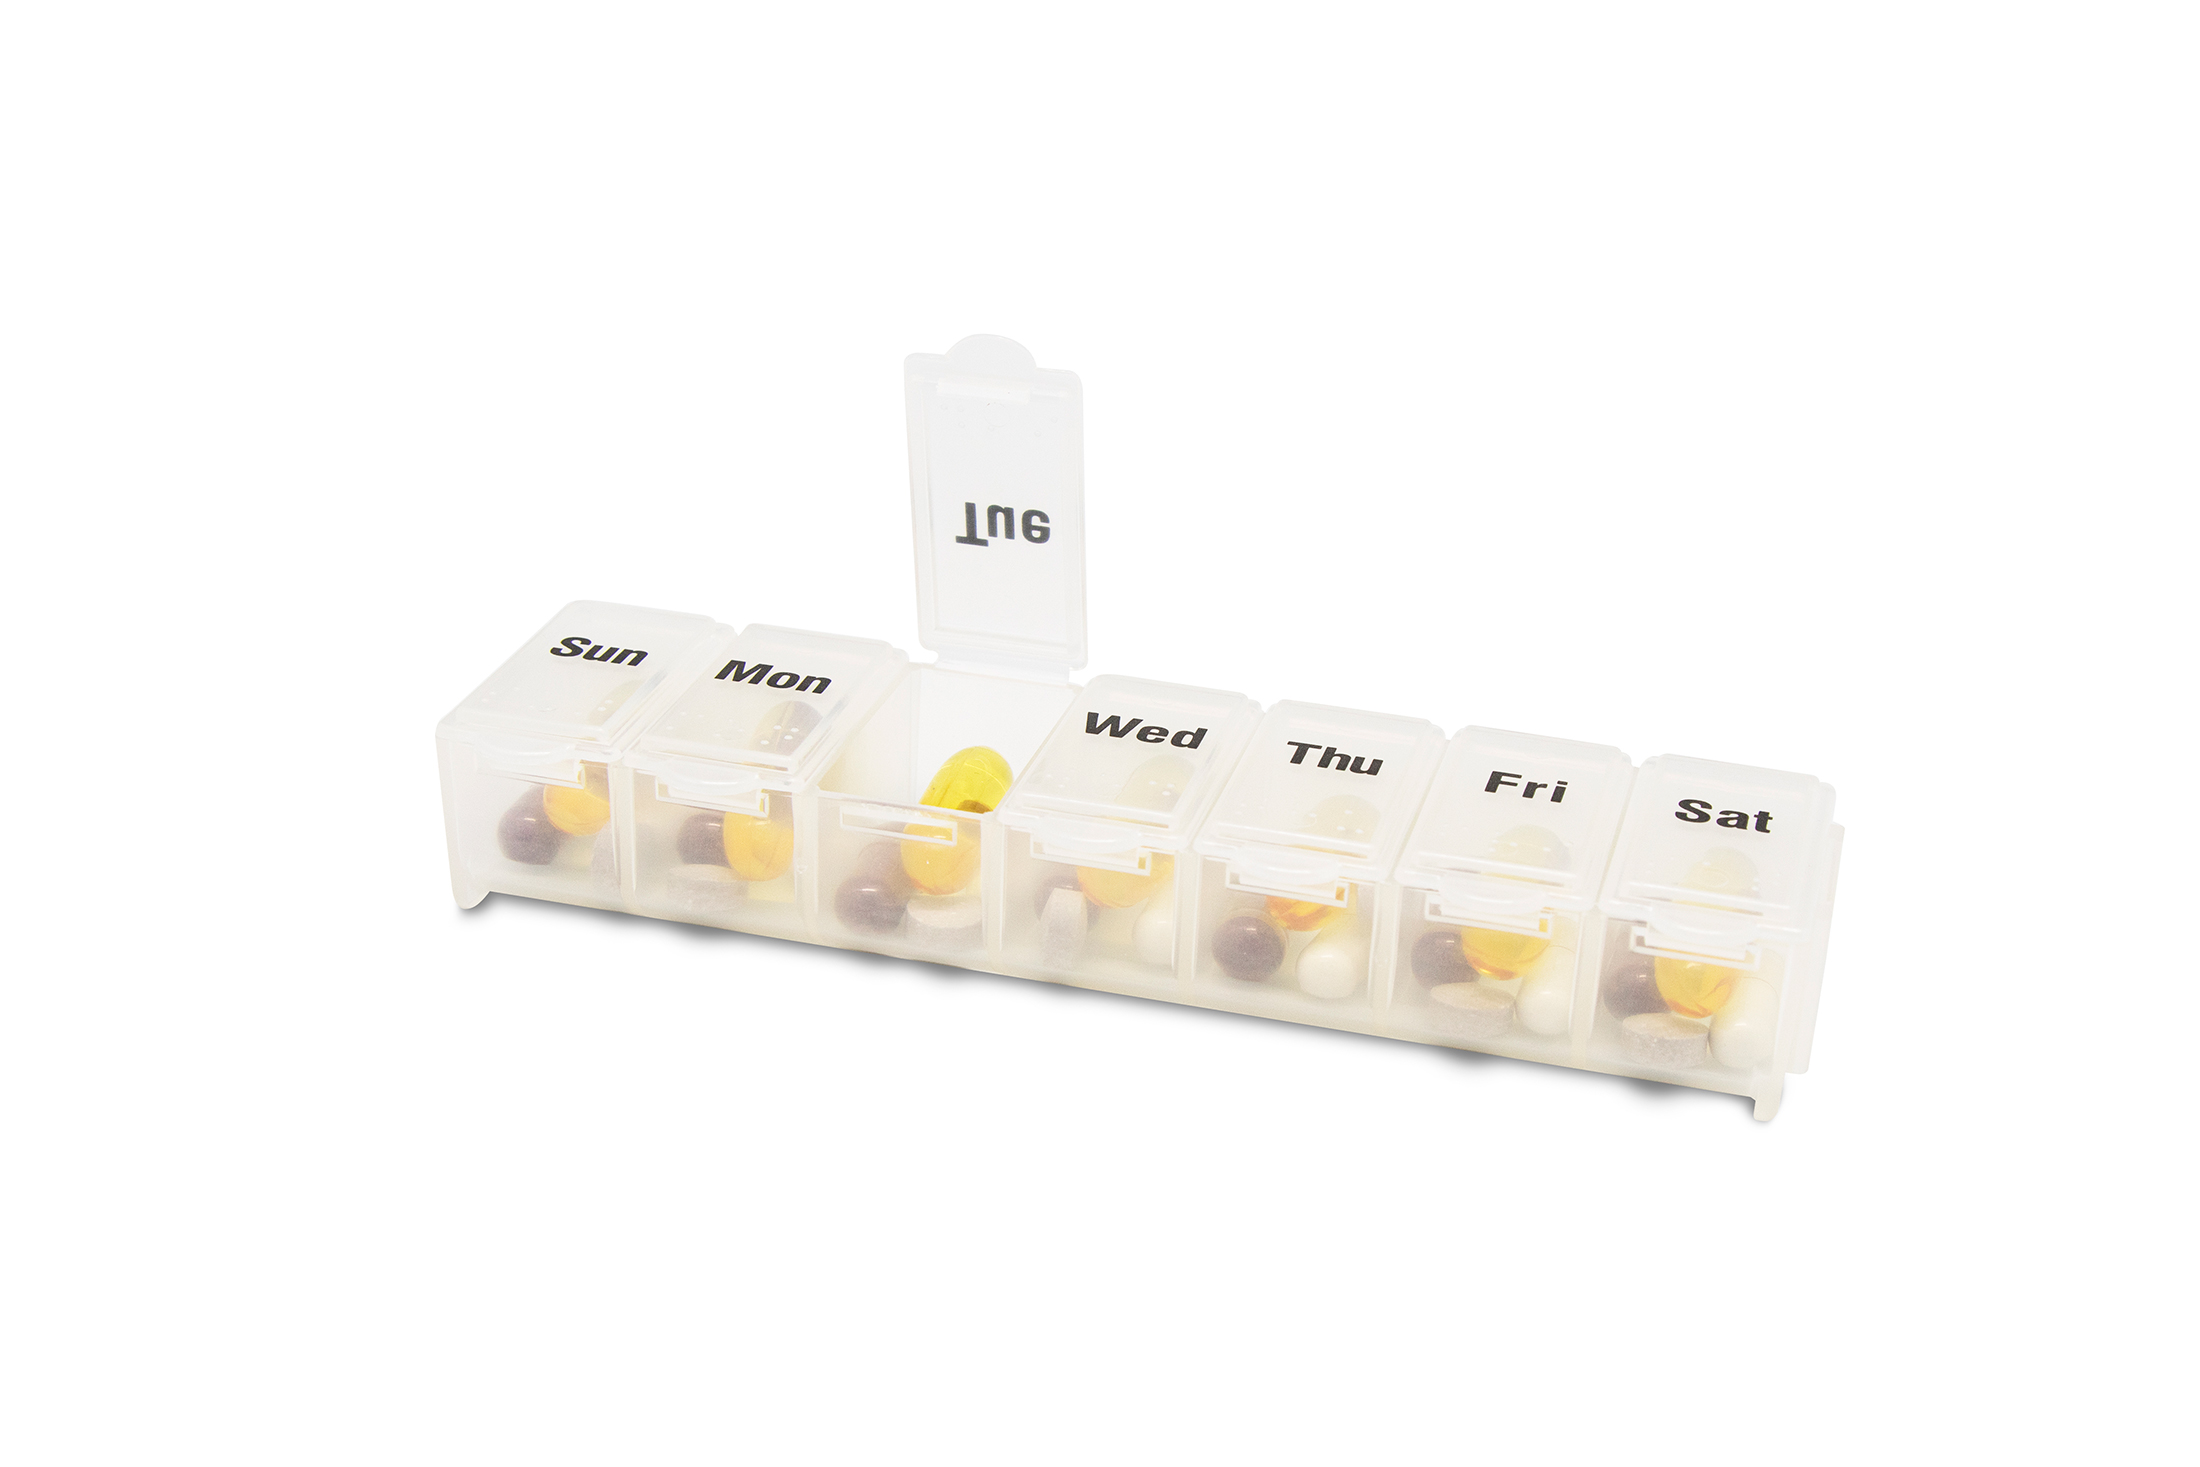 Pill Products Products, Supplies and Equipment